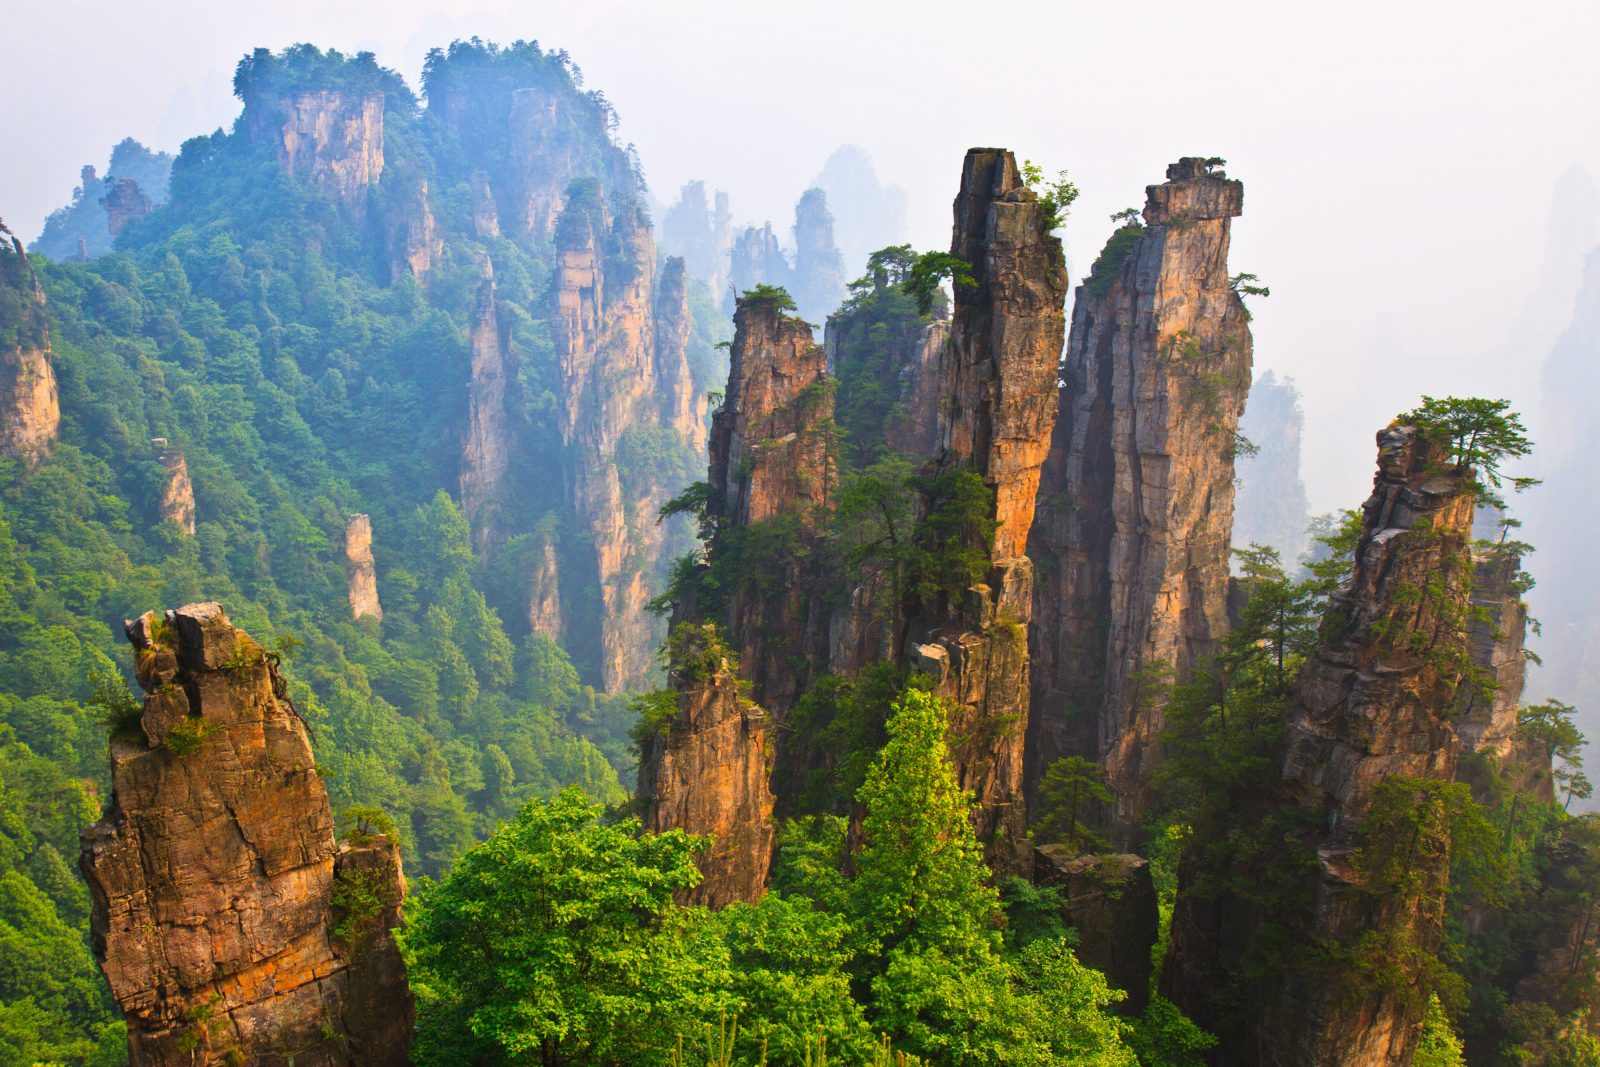 Here Are 24 Glorious Natural Attractions – Can You Match Them to Their Country? Zhangjiajie National Forest Park, China